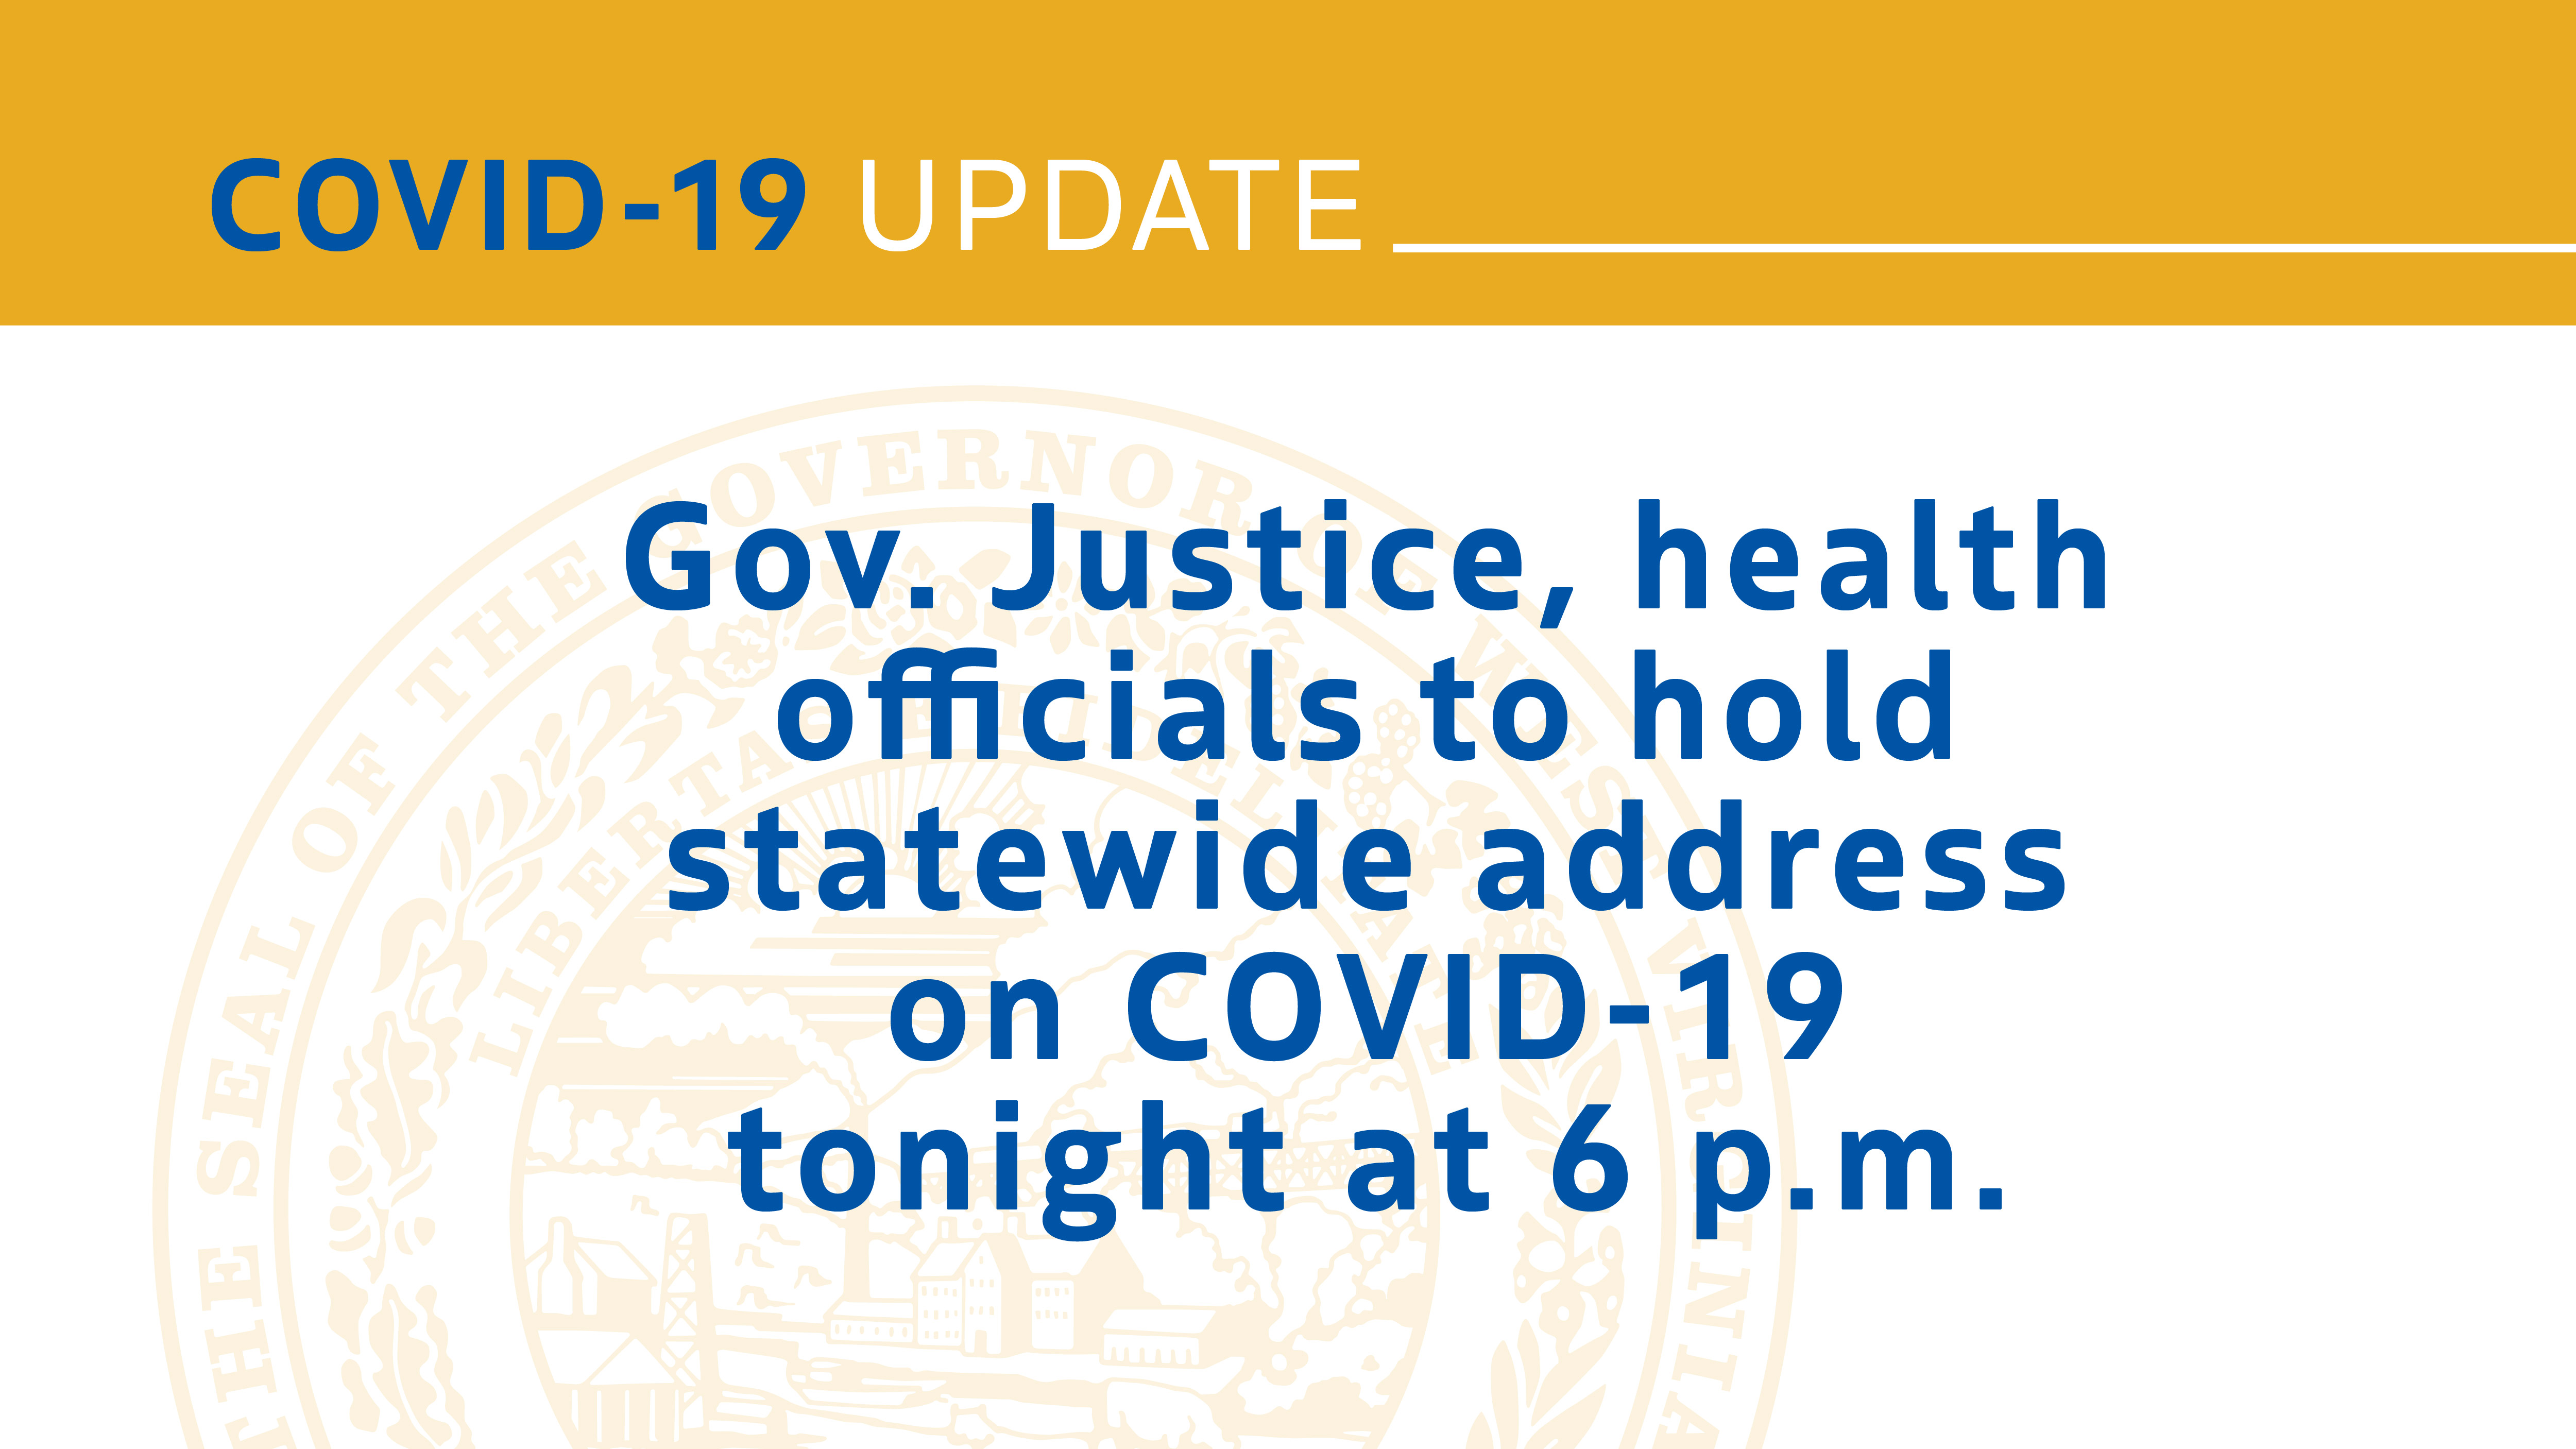 Gov. Justice, health officials to hold statewide address on COVID19